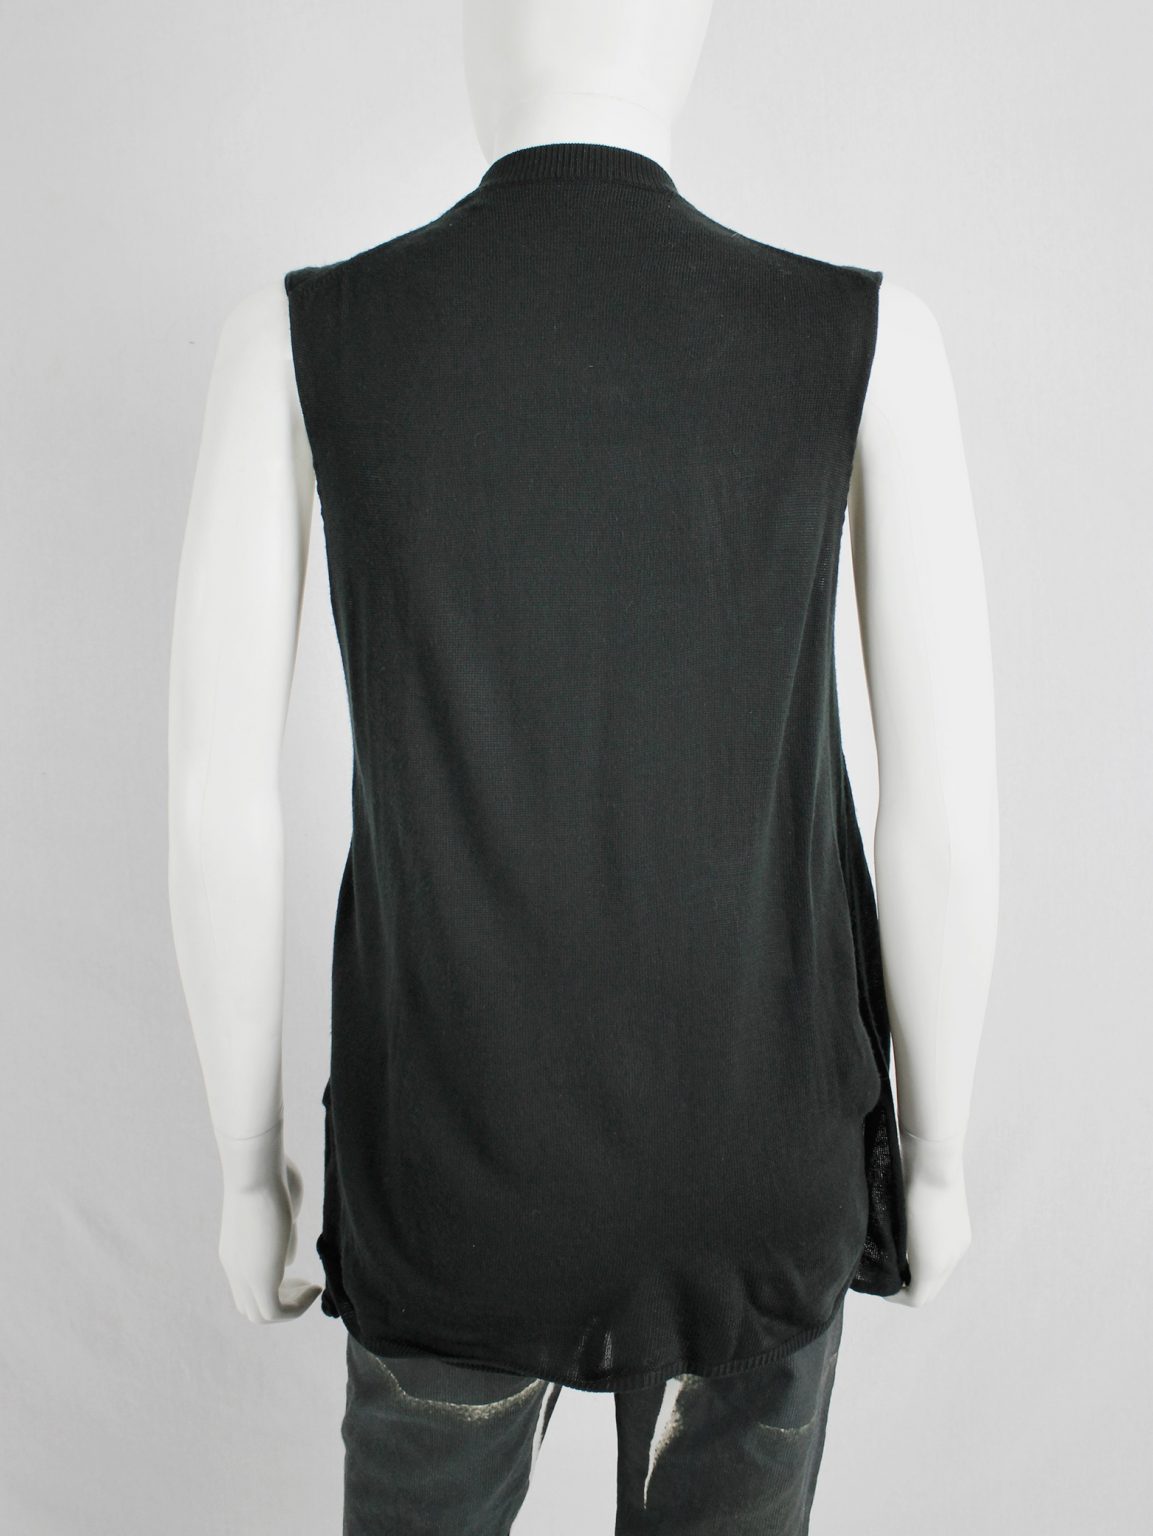 Comme des Garçons black knit top with long drooping strips — spring 2015